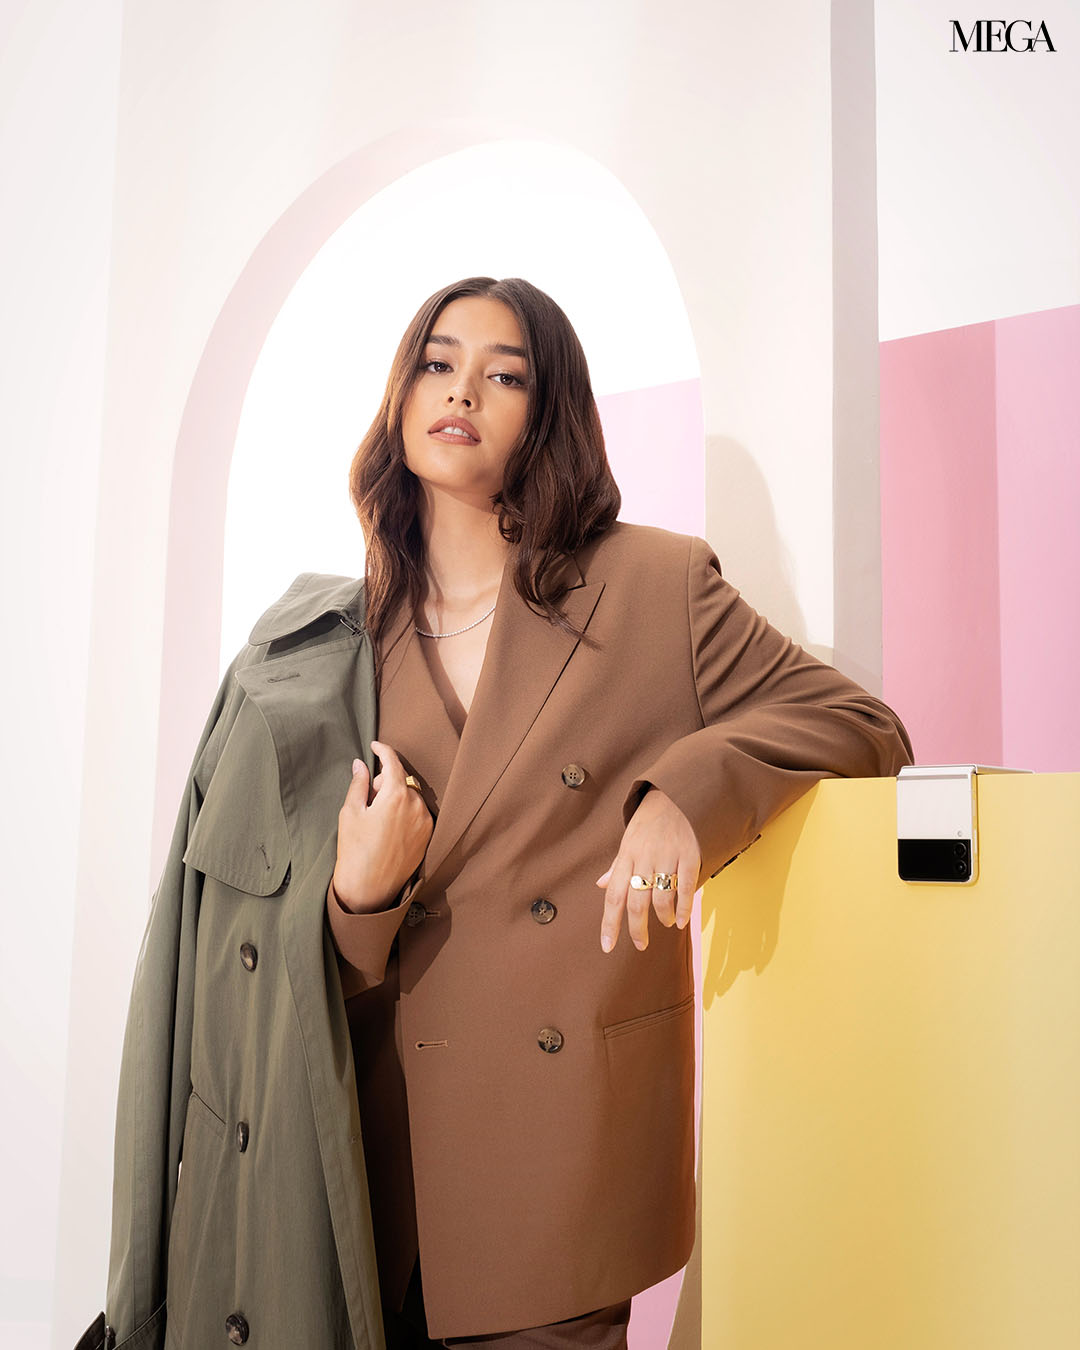 Sharp blazers and trench coats are still wardrobe staples for Liza Soberano, despite recent work-from-home arrangements.